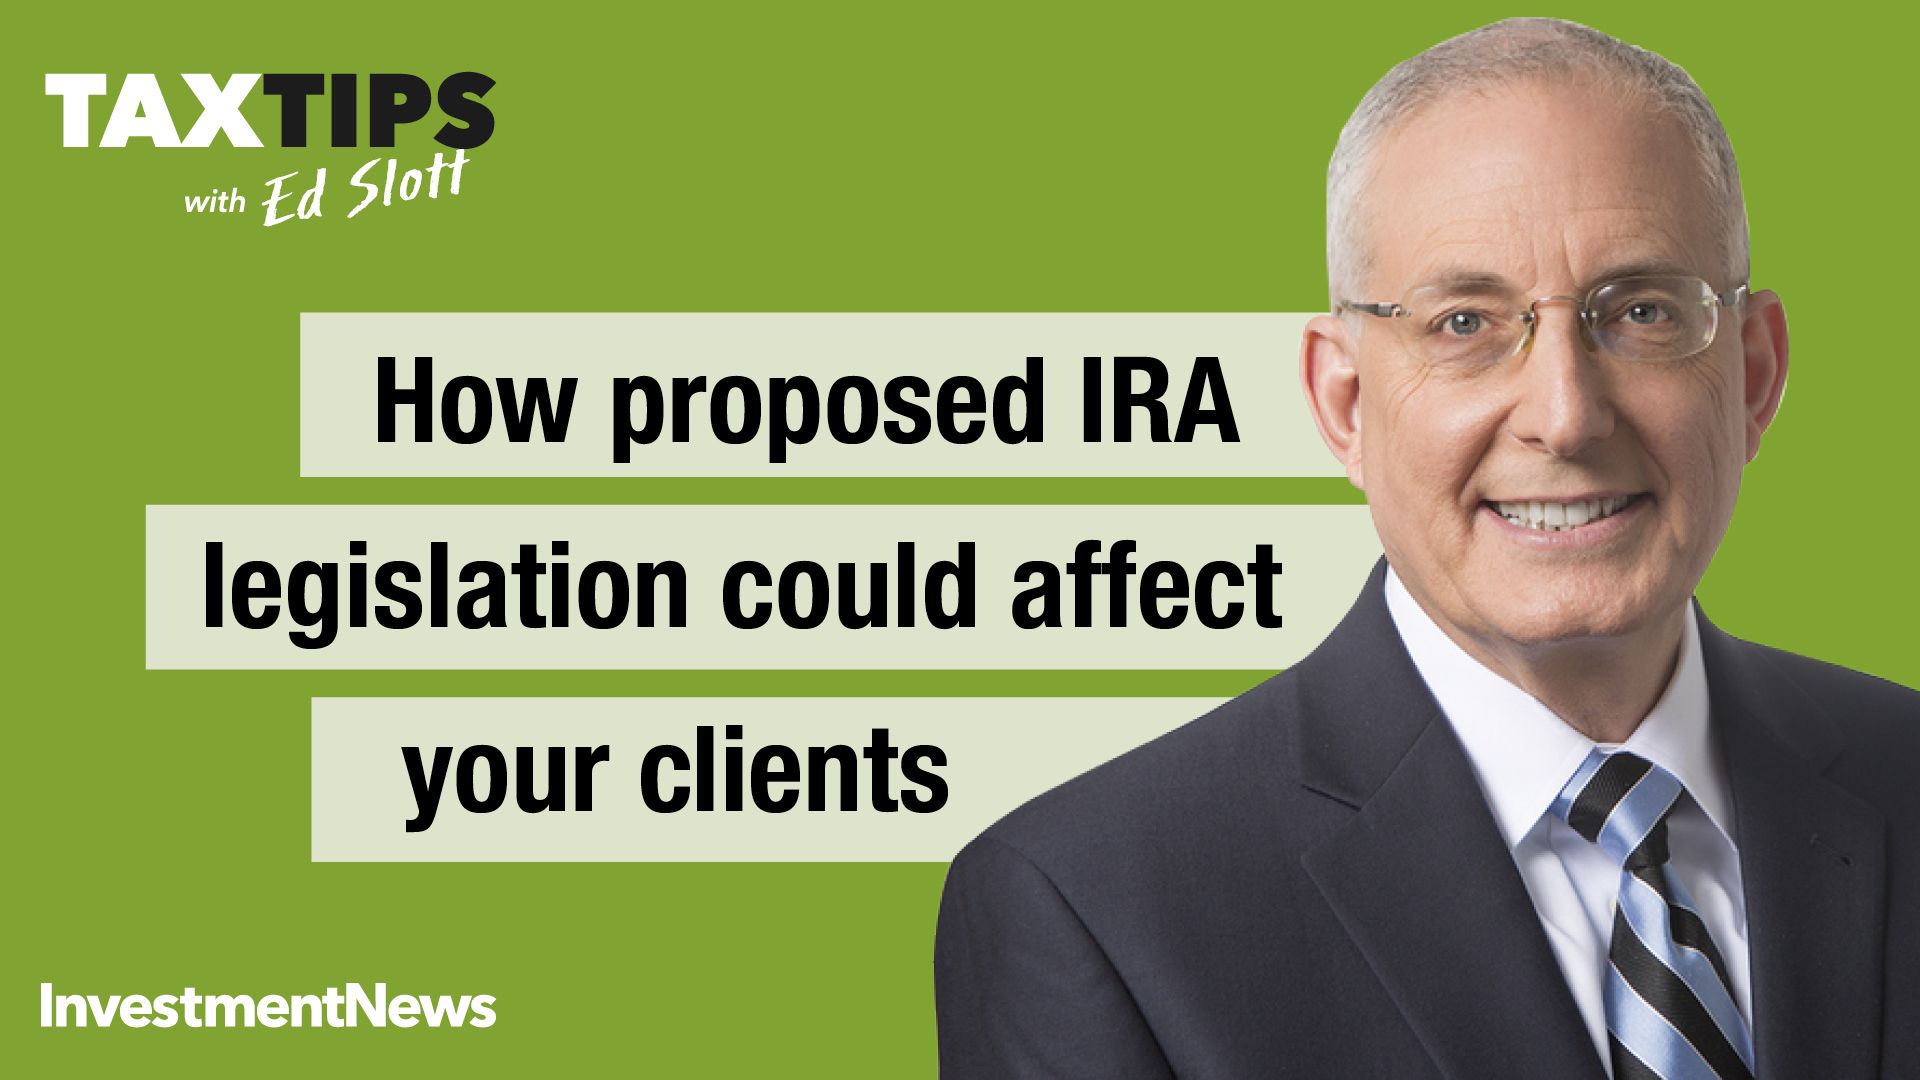 How proposed IRA legislation could affect your clients